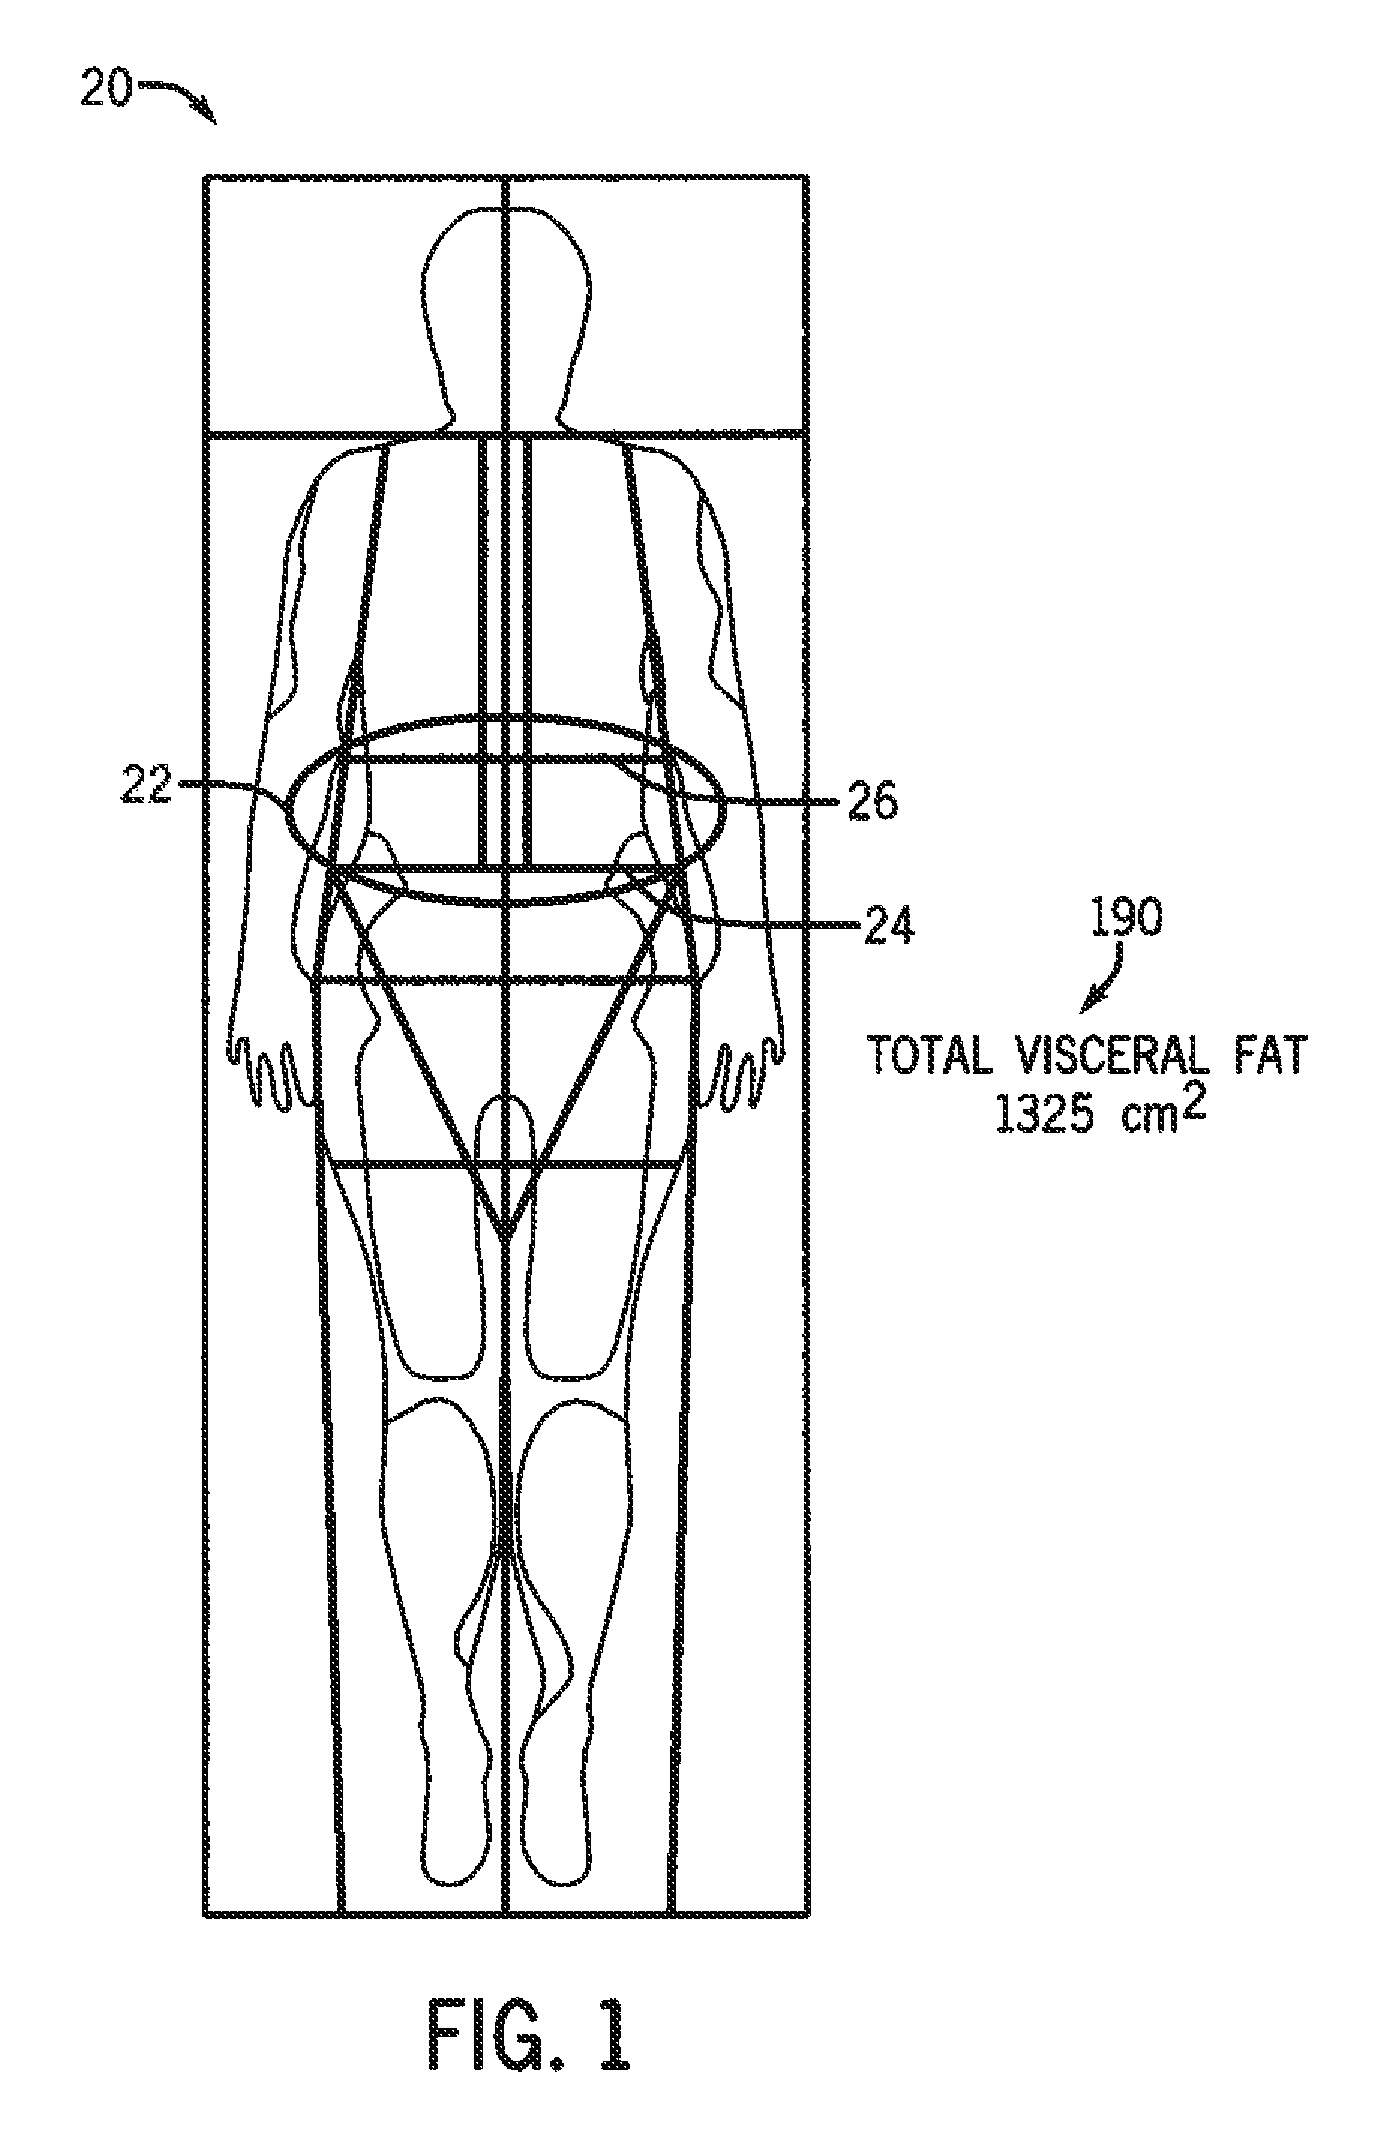 Methods and apparatus for measuring visceral fat mass